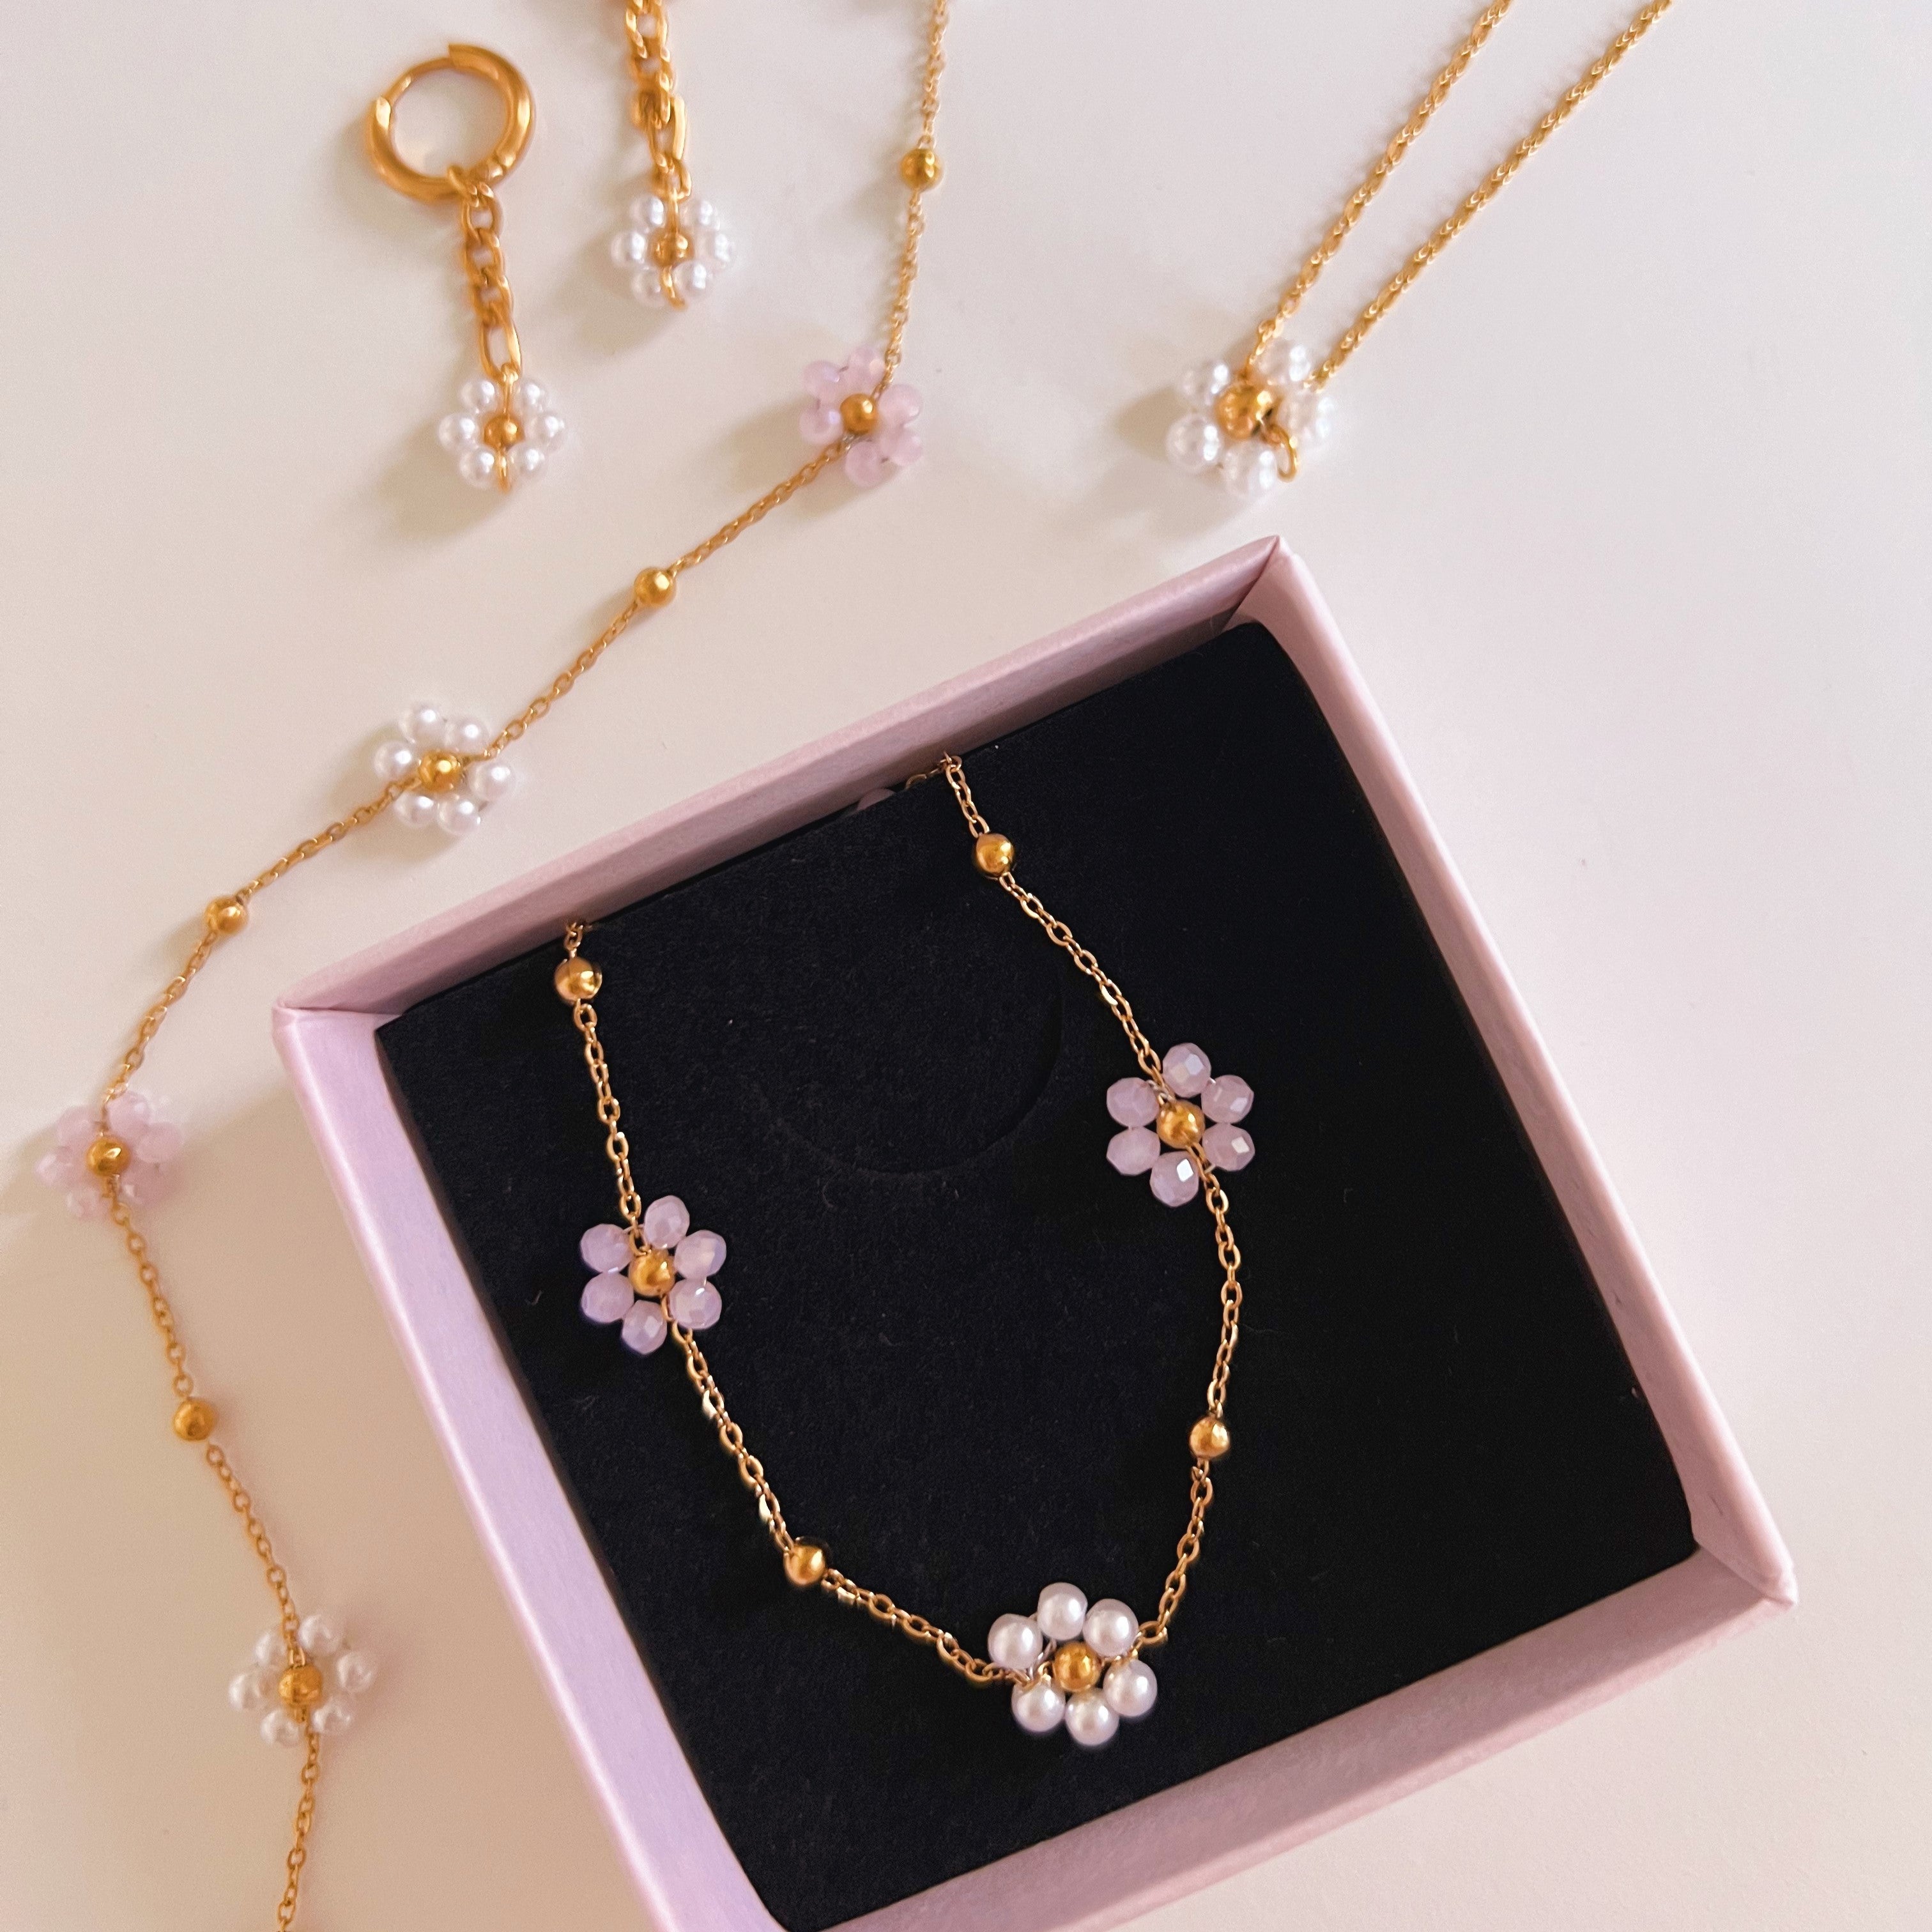 Fleurie necklace white-pink